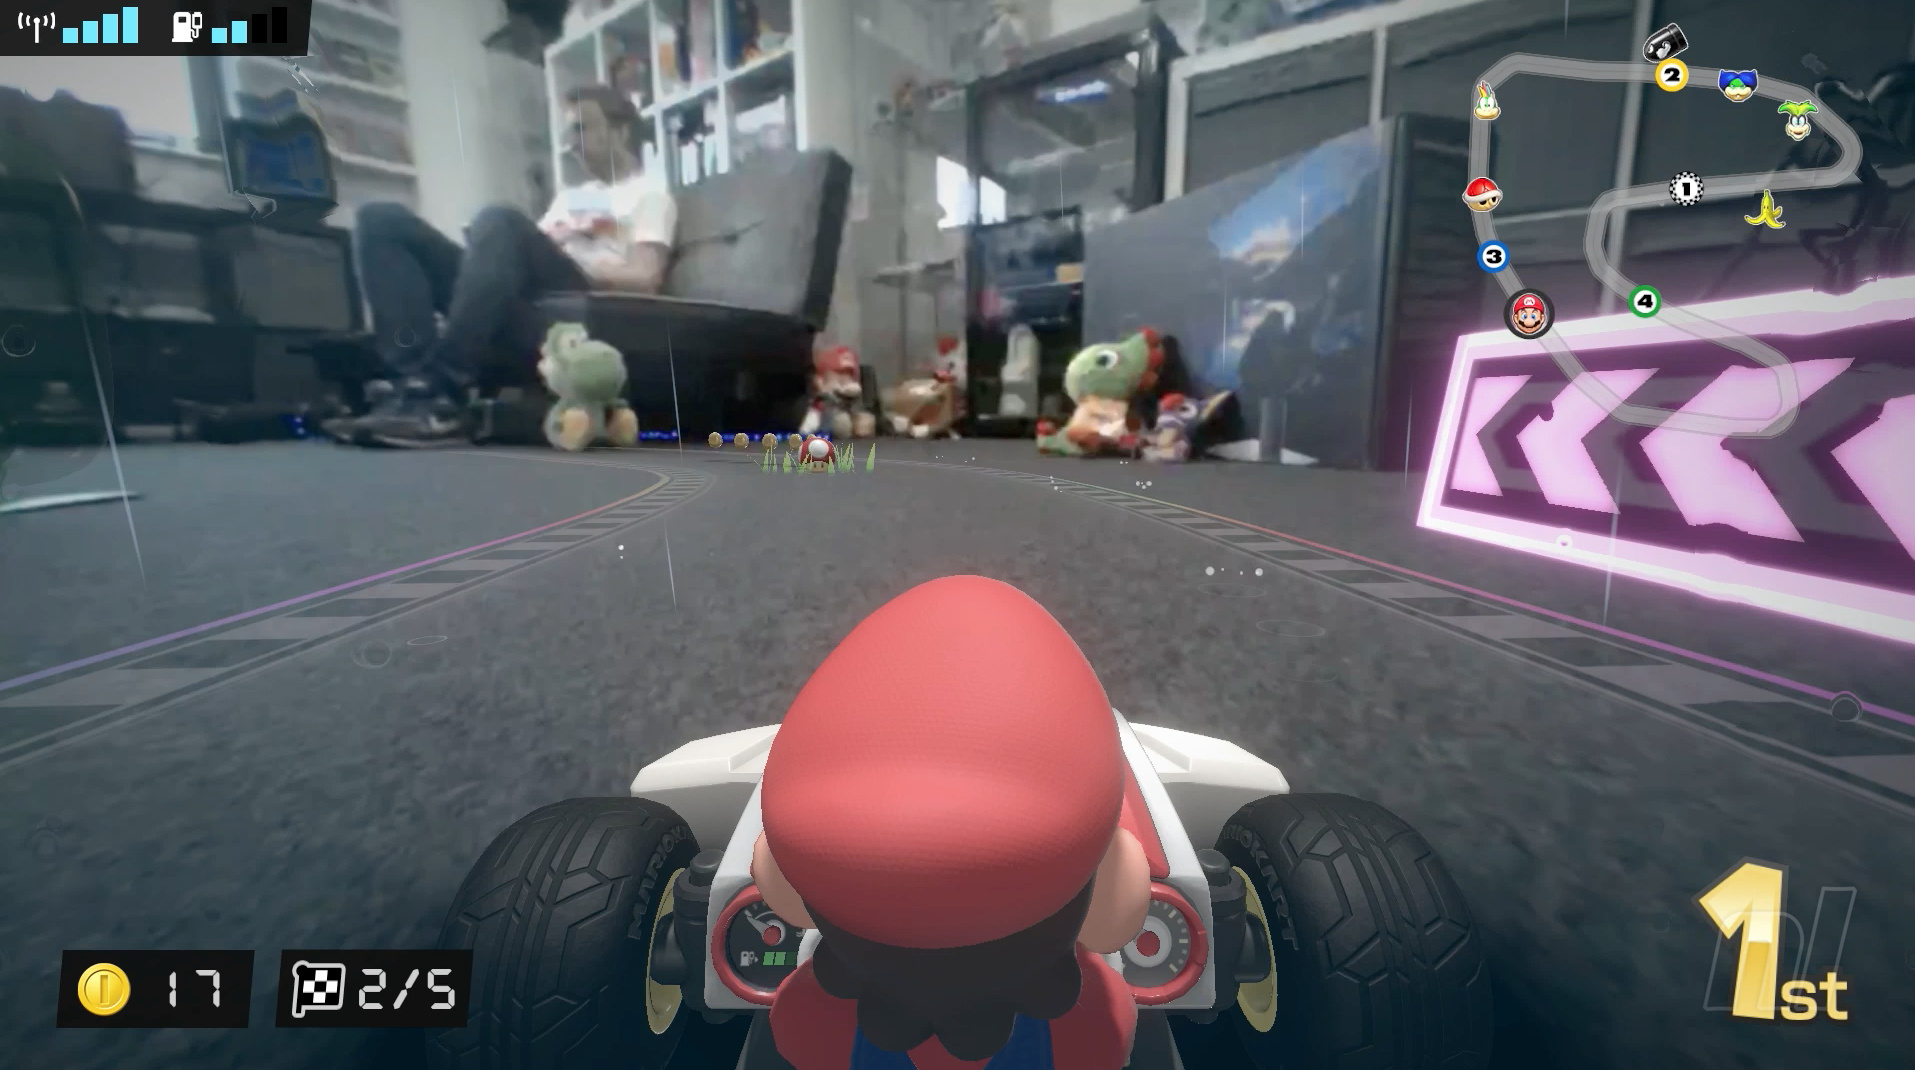 Mario Kart Live Home Circuit review - a glorious toy hemmed in by